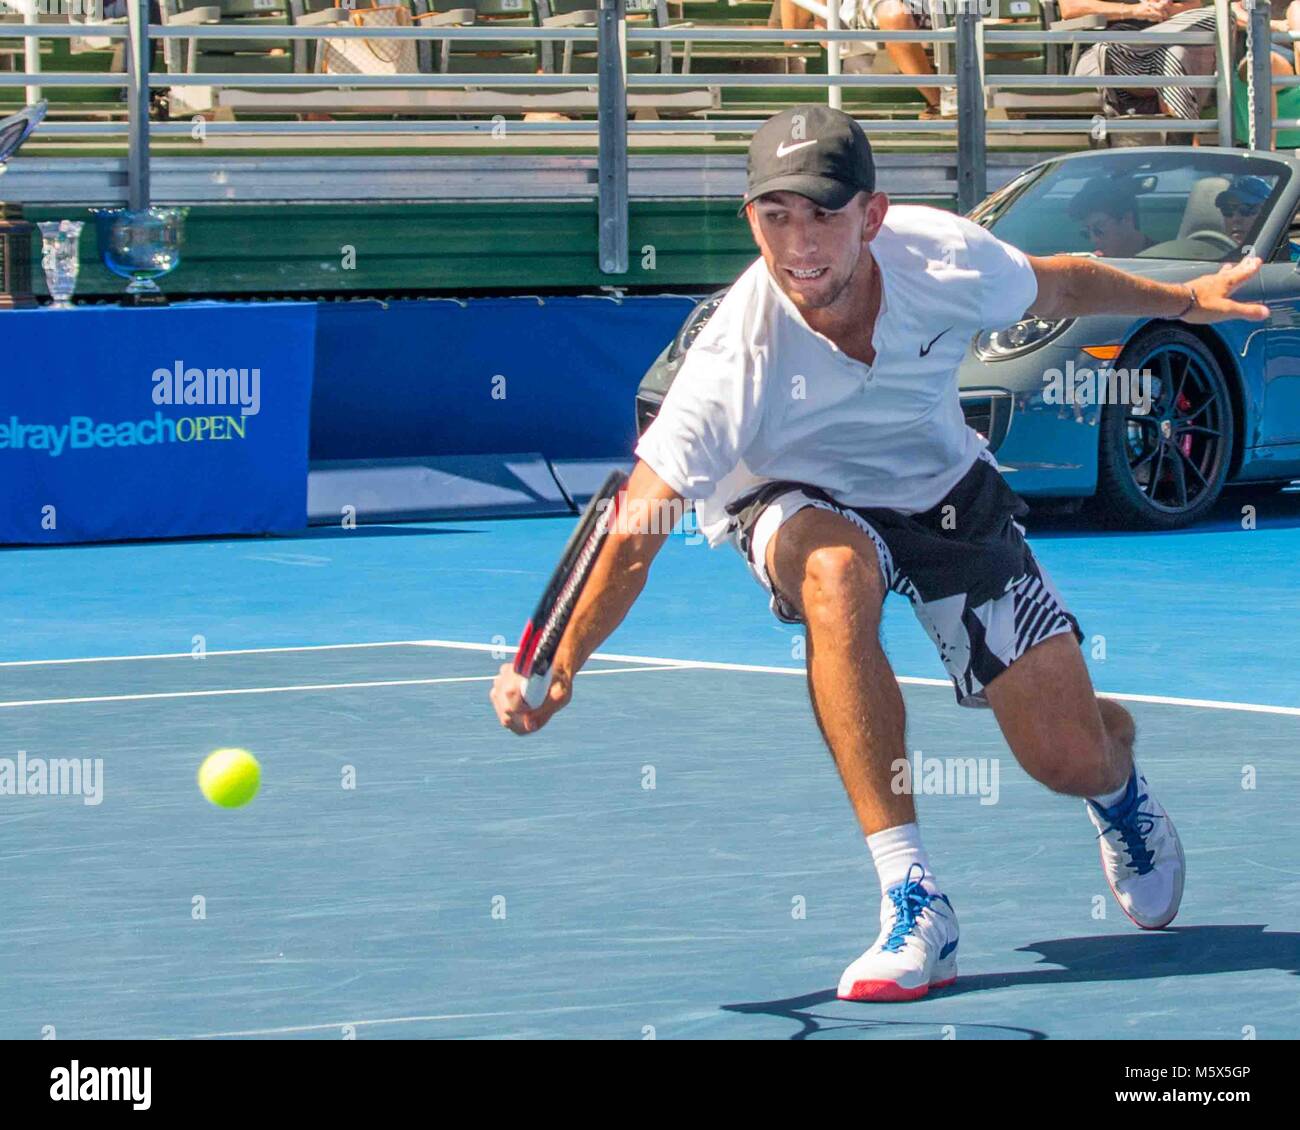 Delray Beach, FL, USA. 25th Feb, 2018. JACKSON WITHROW (US) in action on  court in the Delray Beach Open Men's Doubles Final at the Delray Beach  Tennis Stadium. He and JACK SOCK (